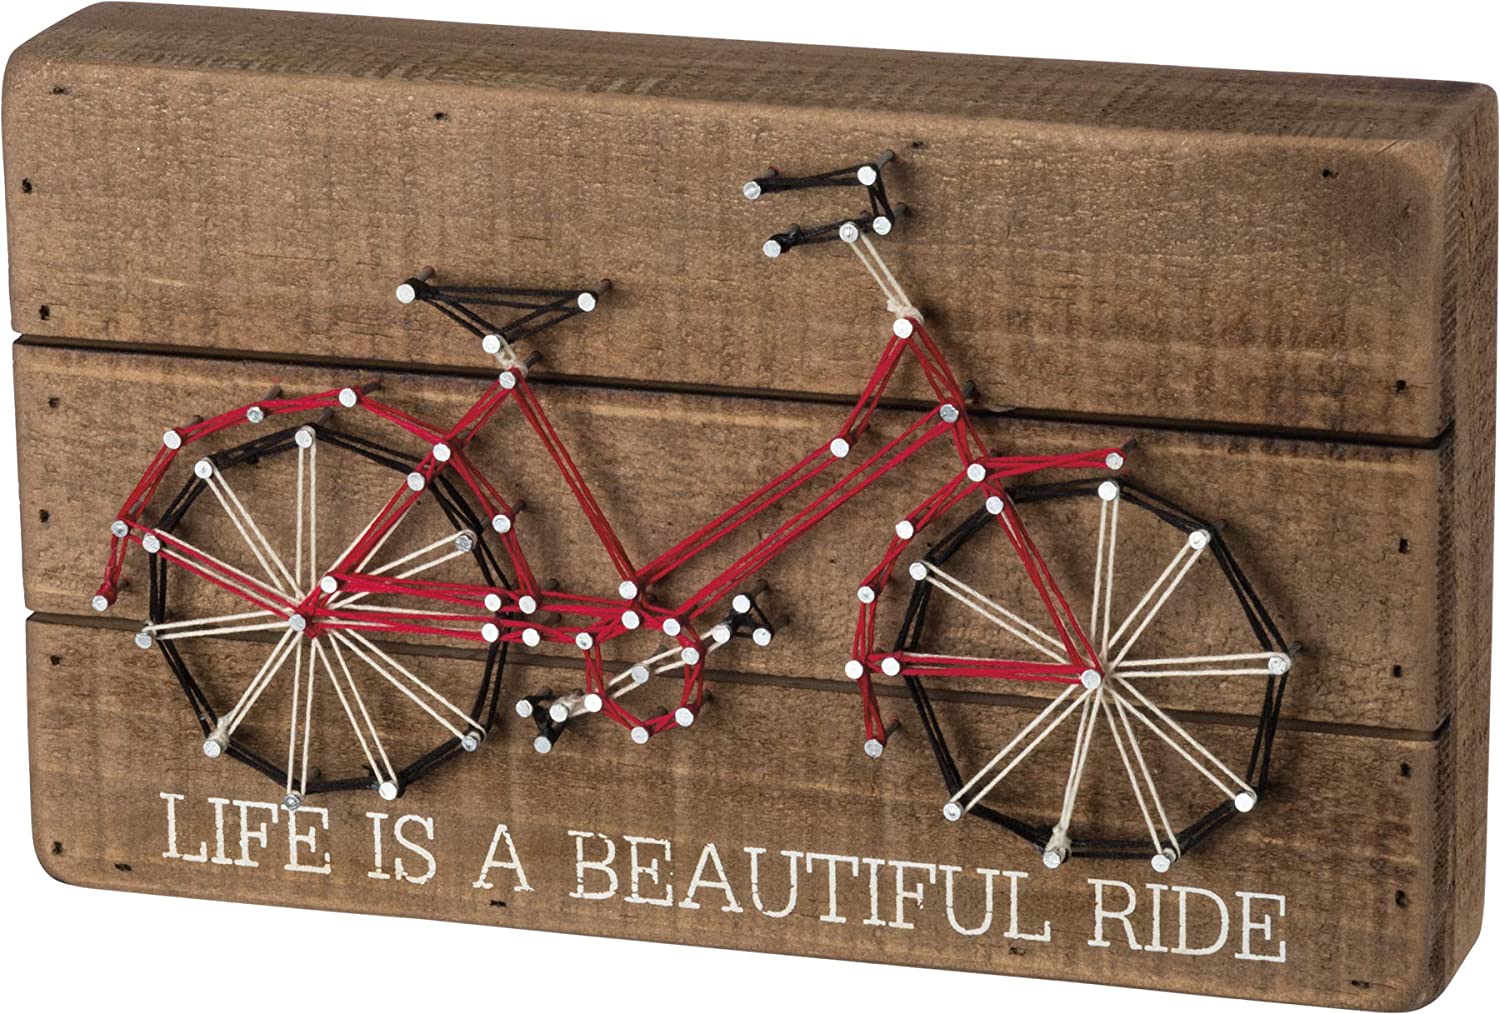 Primitives by Kathy 36354 String Art Wood Box Sign, 10 x 6-Inches, Life is A Beautiful Ride